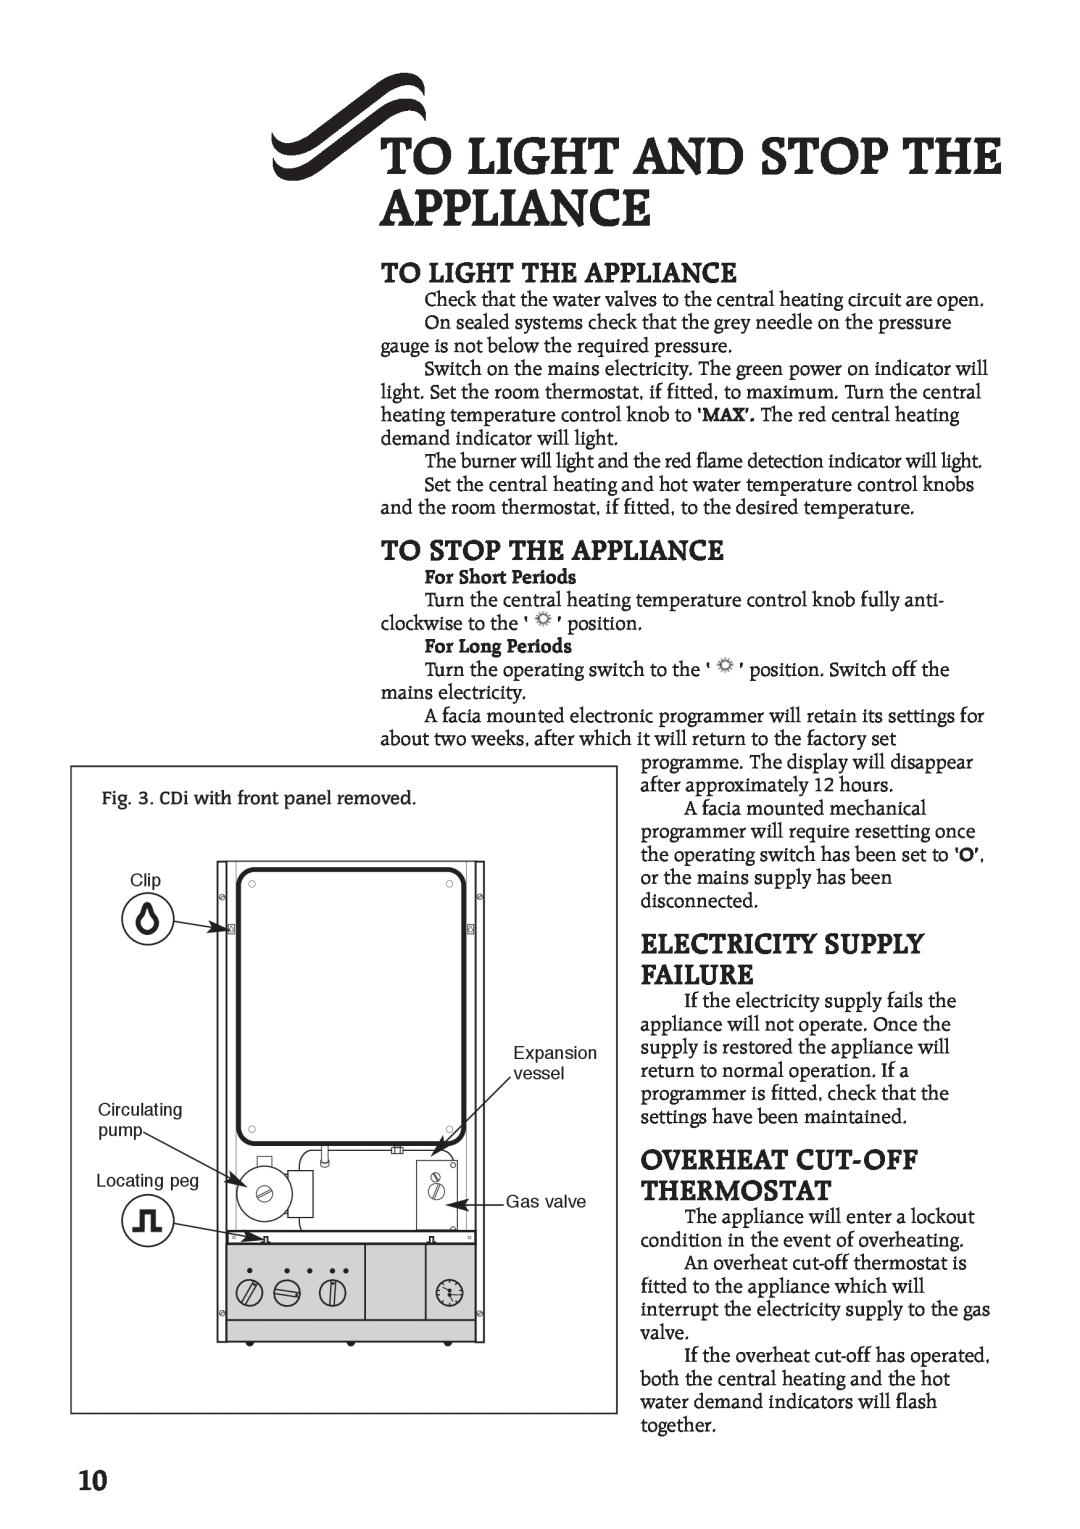 Bosch Appliances 35CDI II, 28CDI To Light And Stop The Appliance, To Light The Appliance, To Stop The Appliance, Failure 